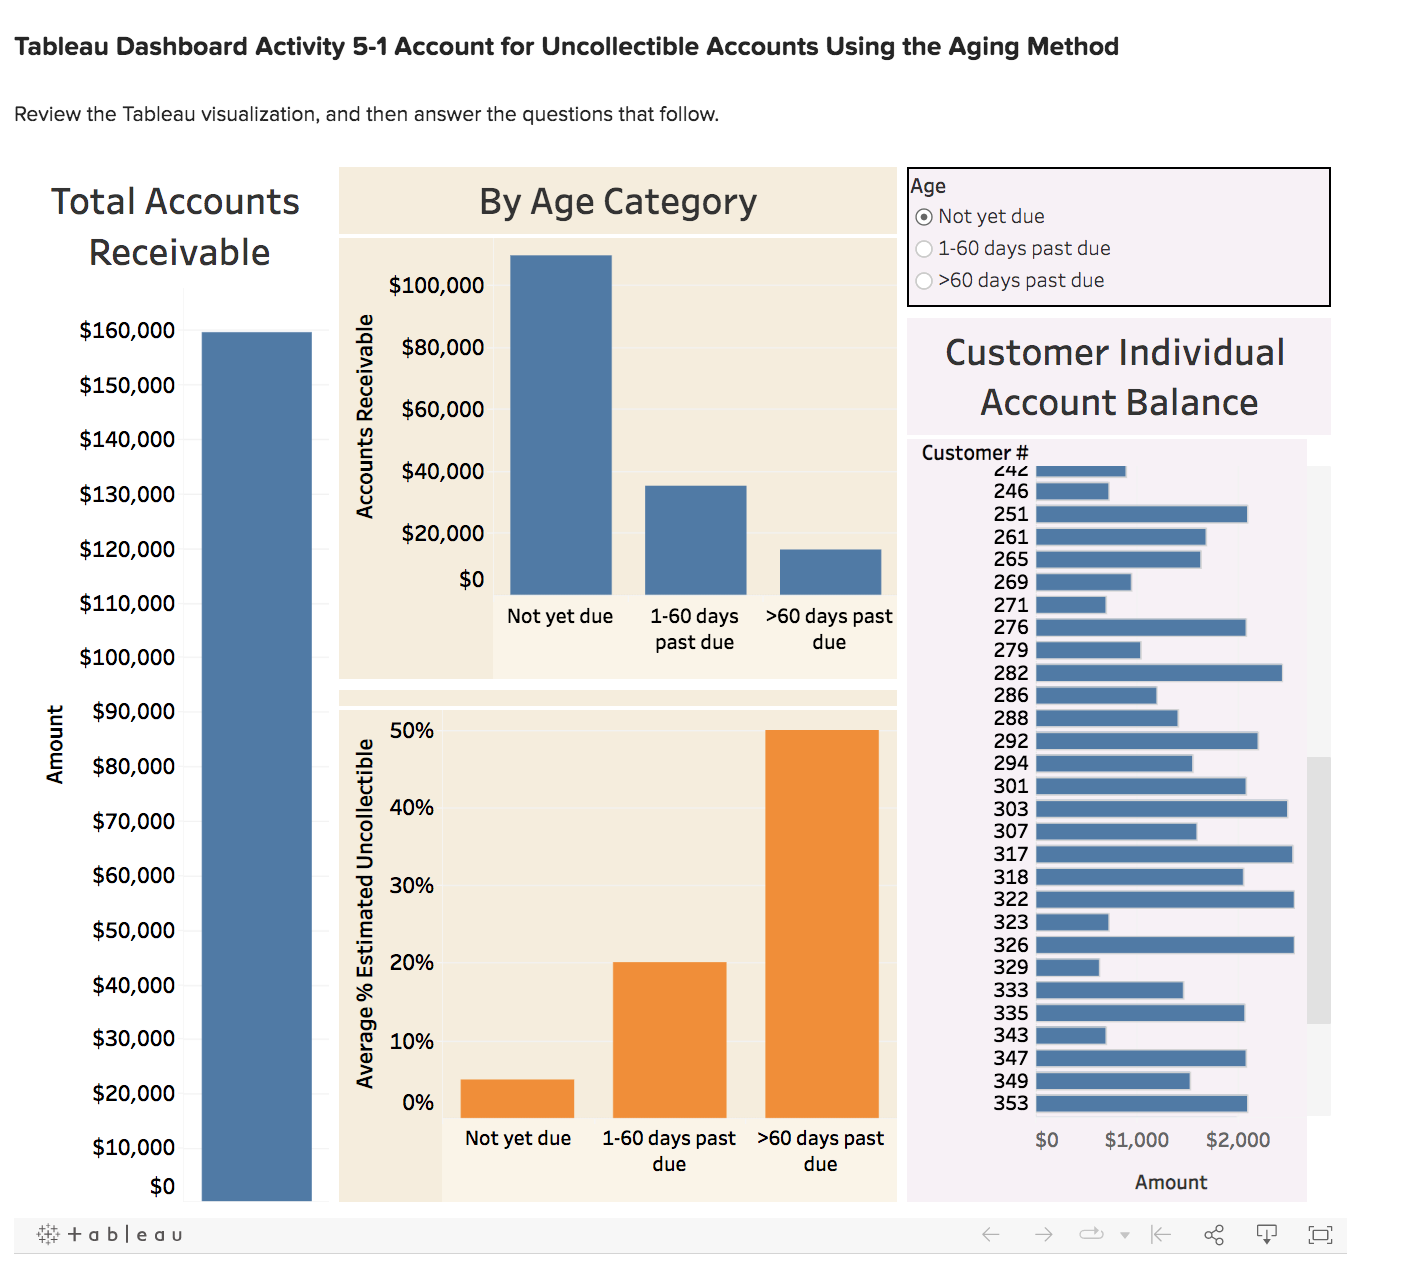 Tableau Dashboard Activity 5-1 Account for Uncollectible Accounts Using the Aging Method Review the Tableau